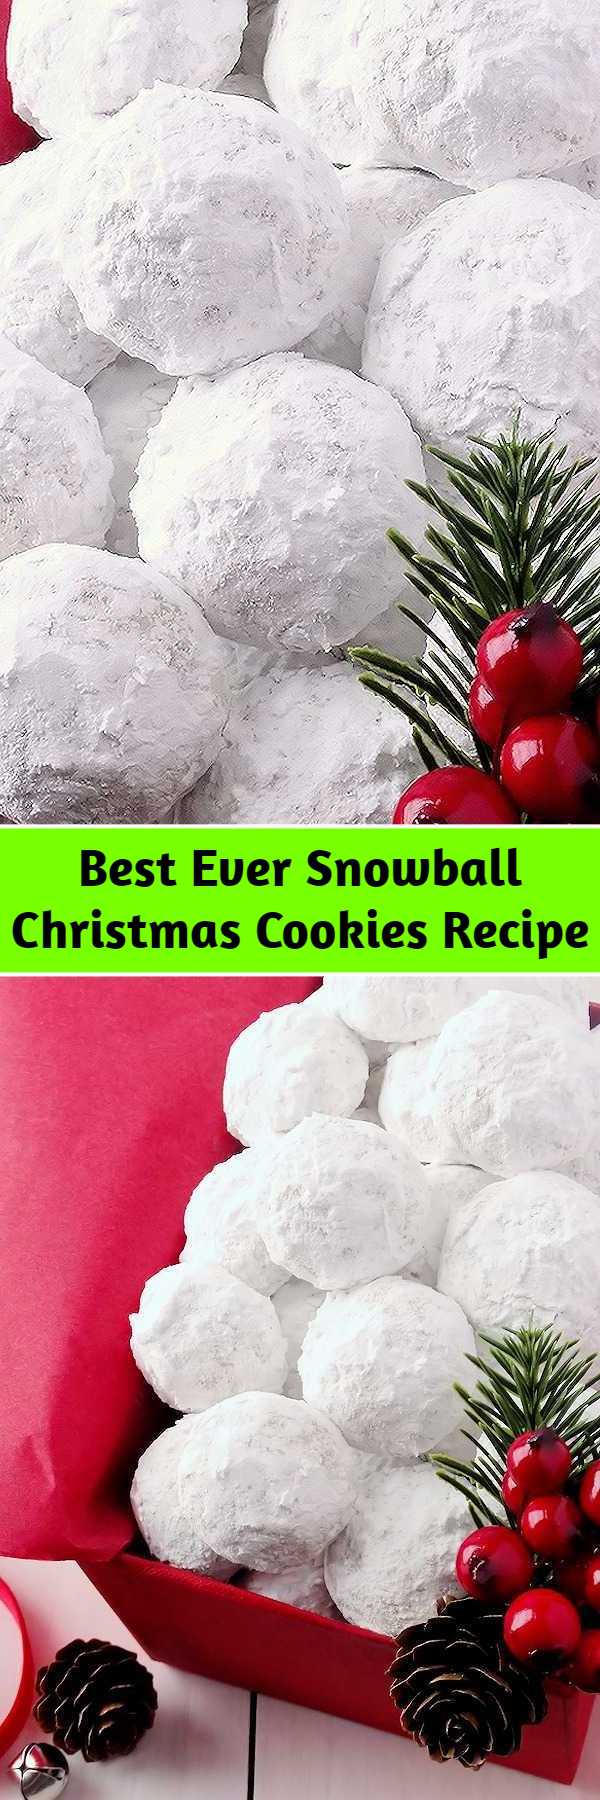 Best Ever Snowball Christmas Cookies Recipe - Simply the best! Buttery, never dry, with plenty of walnuts for a scrumptious melt-in-your-mouth shortbread cookie (also known as Russian Teacakes or Mexican Wedding Cookies). Everyone will LOVE these classic Christmas cookies!